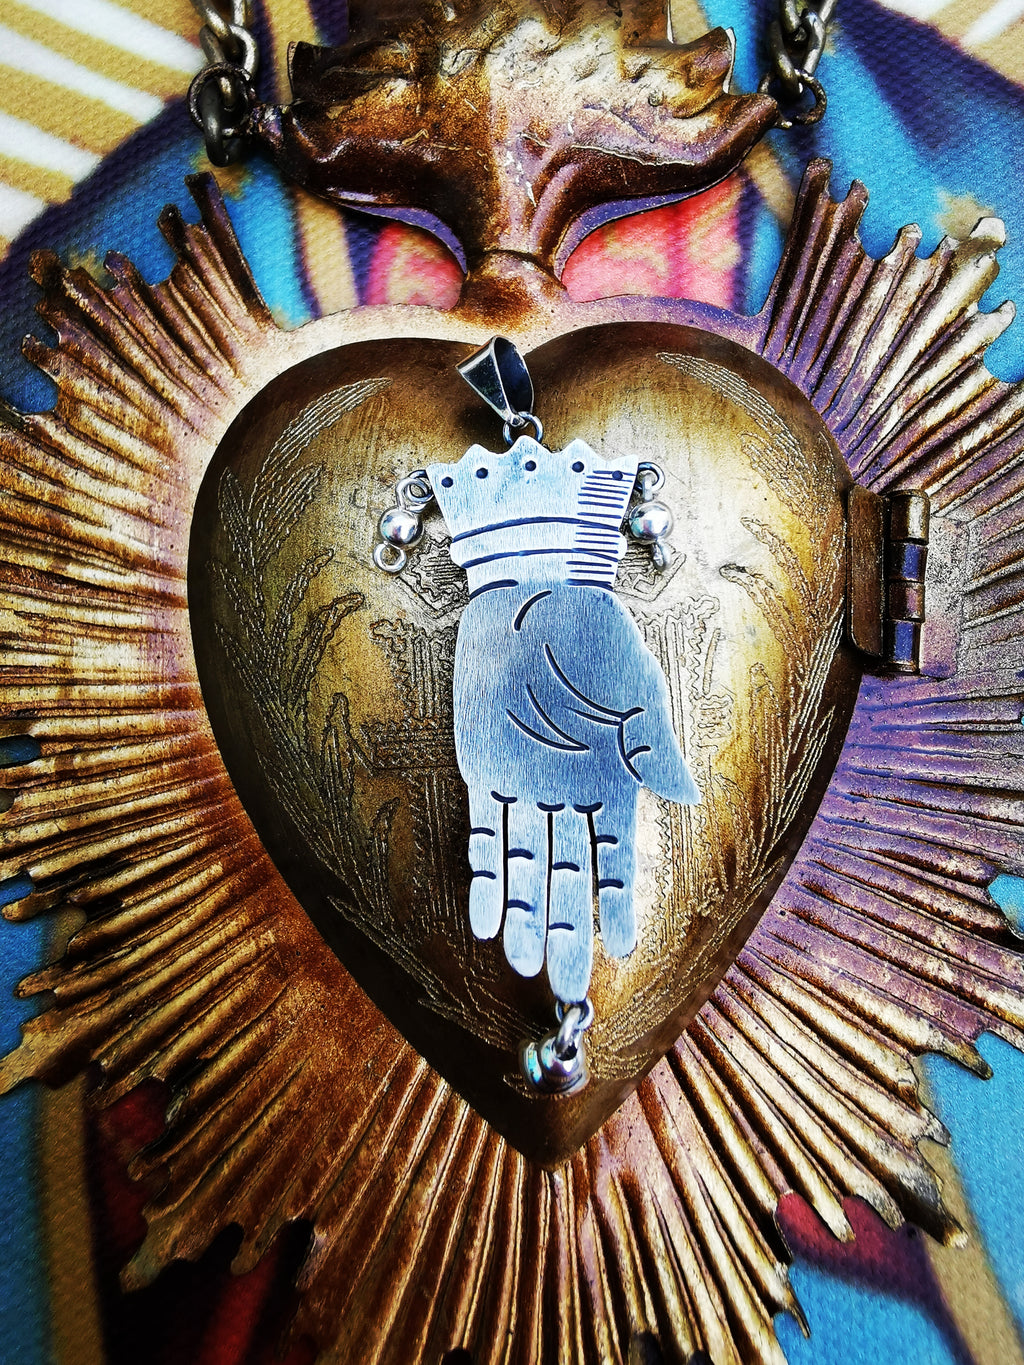 In Mexico the hand isconsider it to represent friendship, love and truth. The hand motif in Mexican jewelry increased after Pablo Picasso's gift of the silver hand-shaped earrings to Frida Kahlo in the 1930's or 40's as he painted herself in them.

This pendant is handmade in Mexico from Mexican silver.

5.5 x 1.8cm

925 silver

